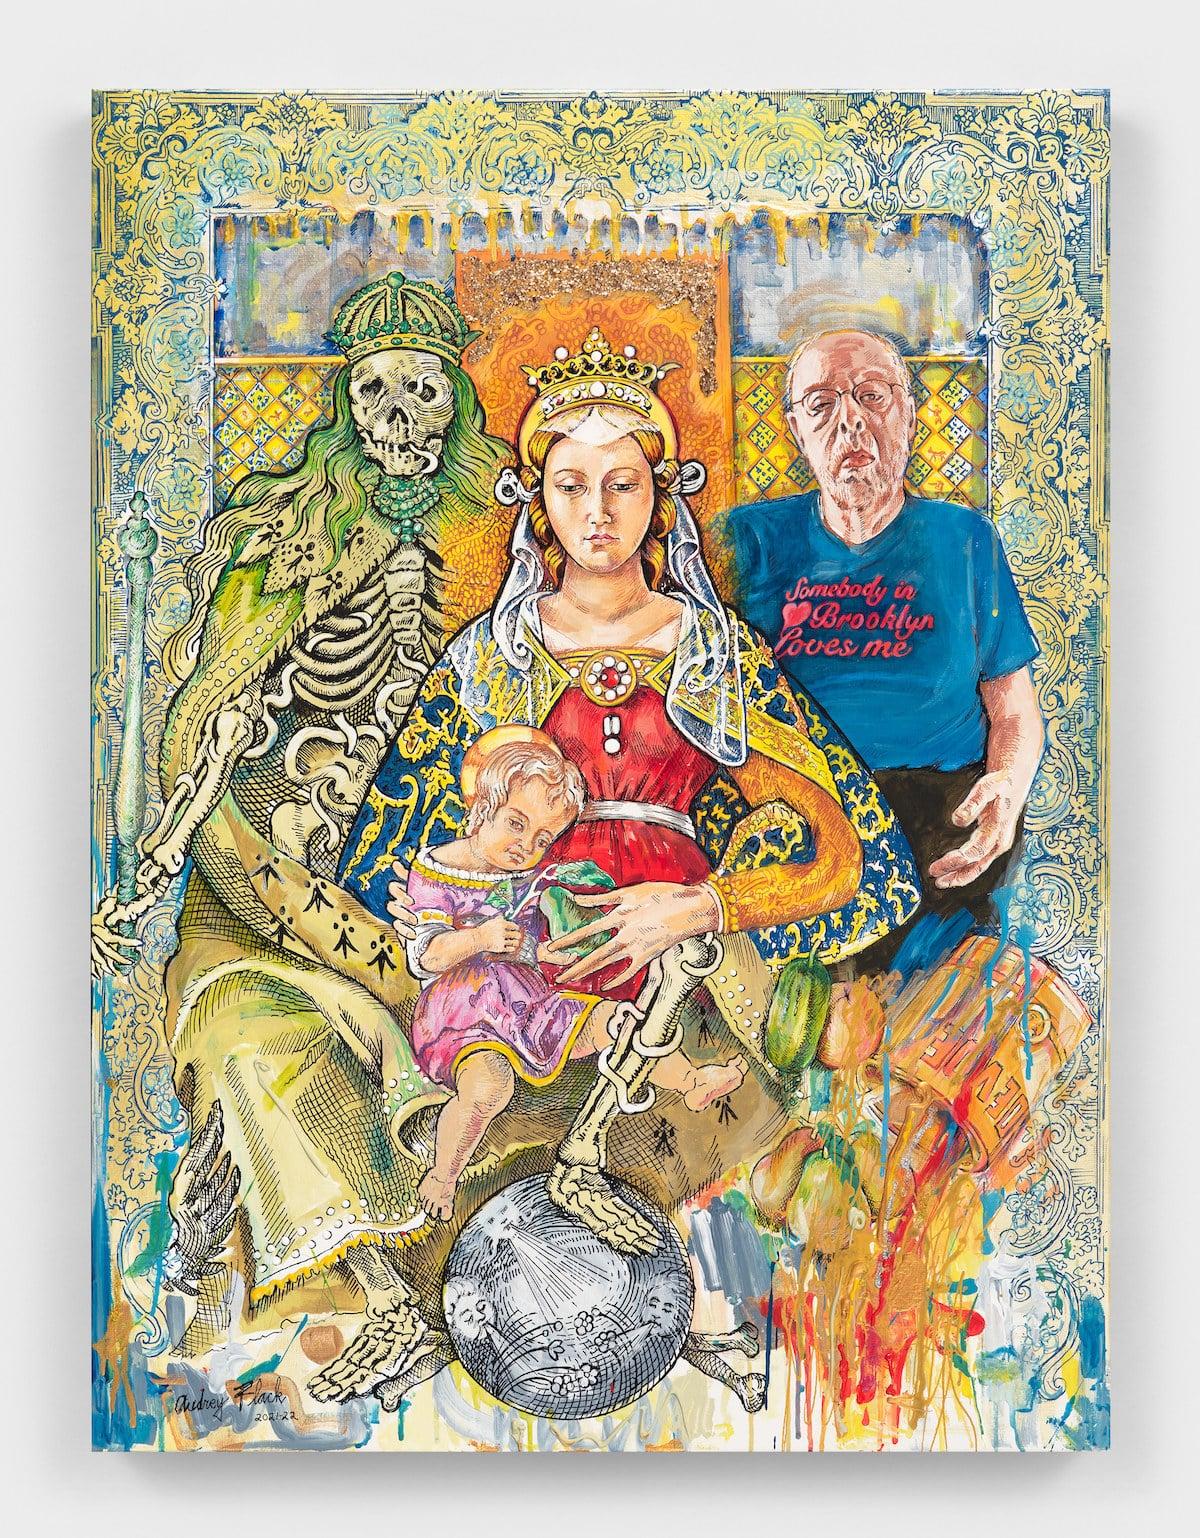 Audrey Flack, Madonna della Candeletta (Someone in Brooklyn Loves Me), 2021–22/ Acrylic and mixed media on canvas. 40 x 30 in. (101.6 x 76.2 cm)